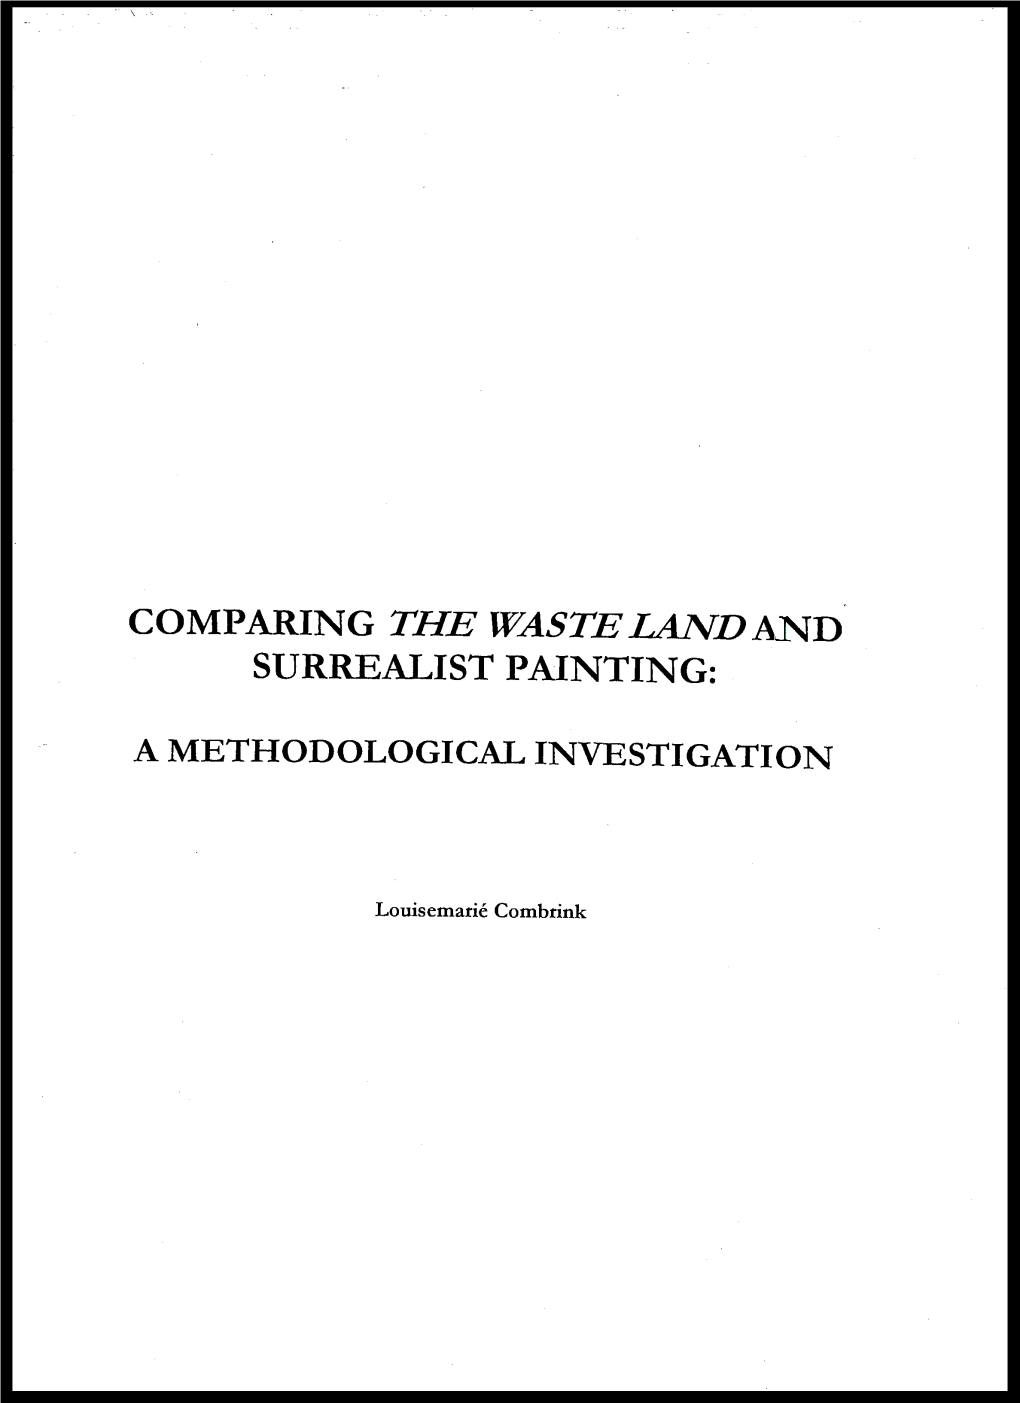 Comparing the Waste Land and Surrealist Painting